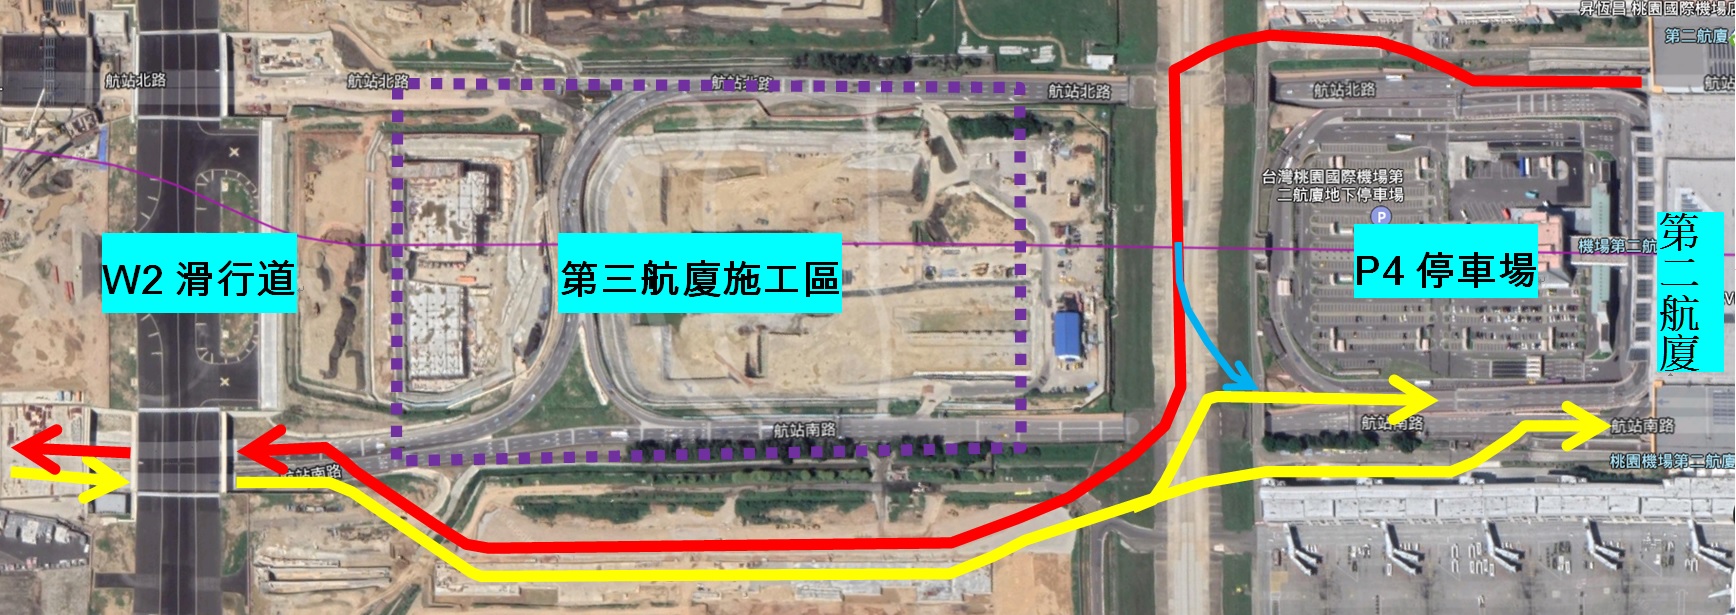 The airport terminal 3 construction is expected to be completed from 2024 to 2026. Photo/Provided by Taoyuan International Airport Corporation, Ltd.